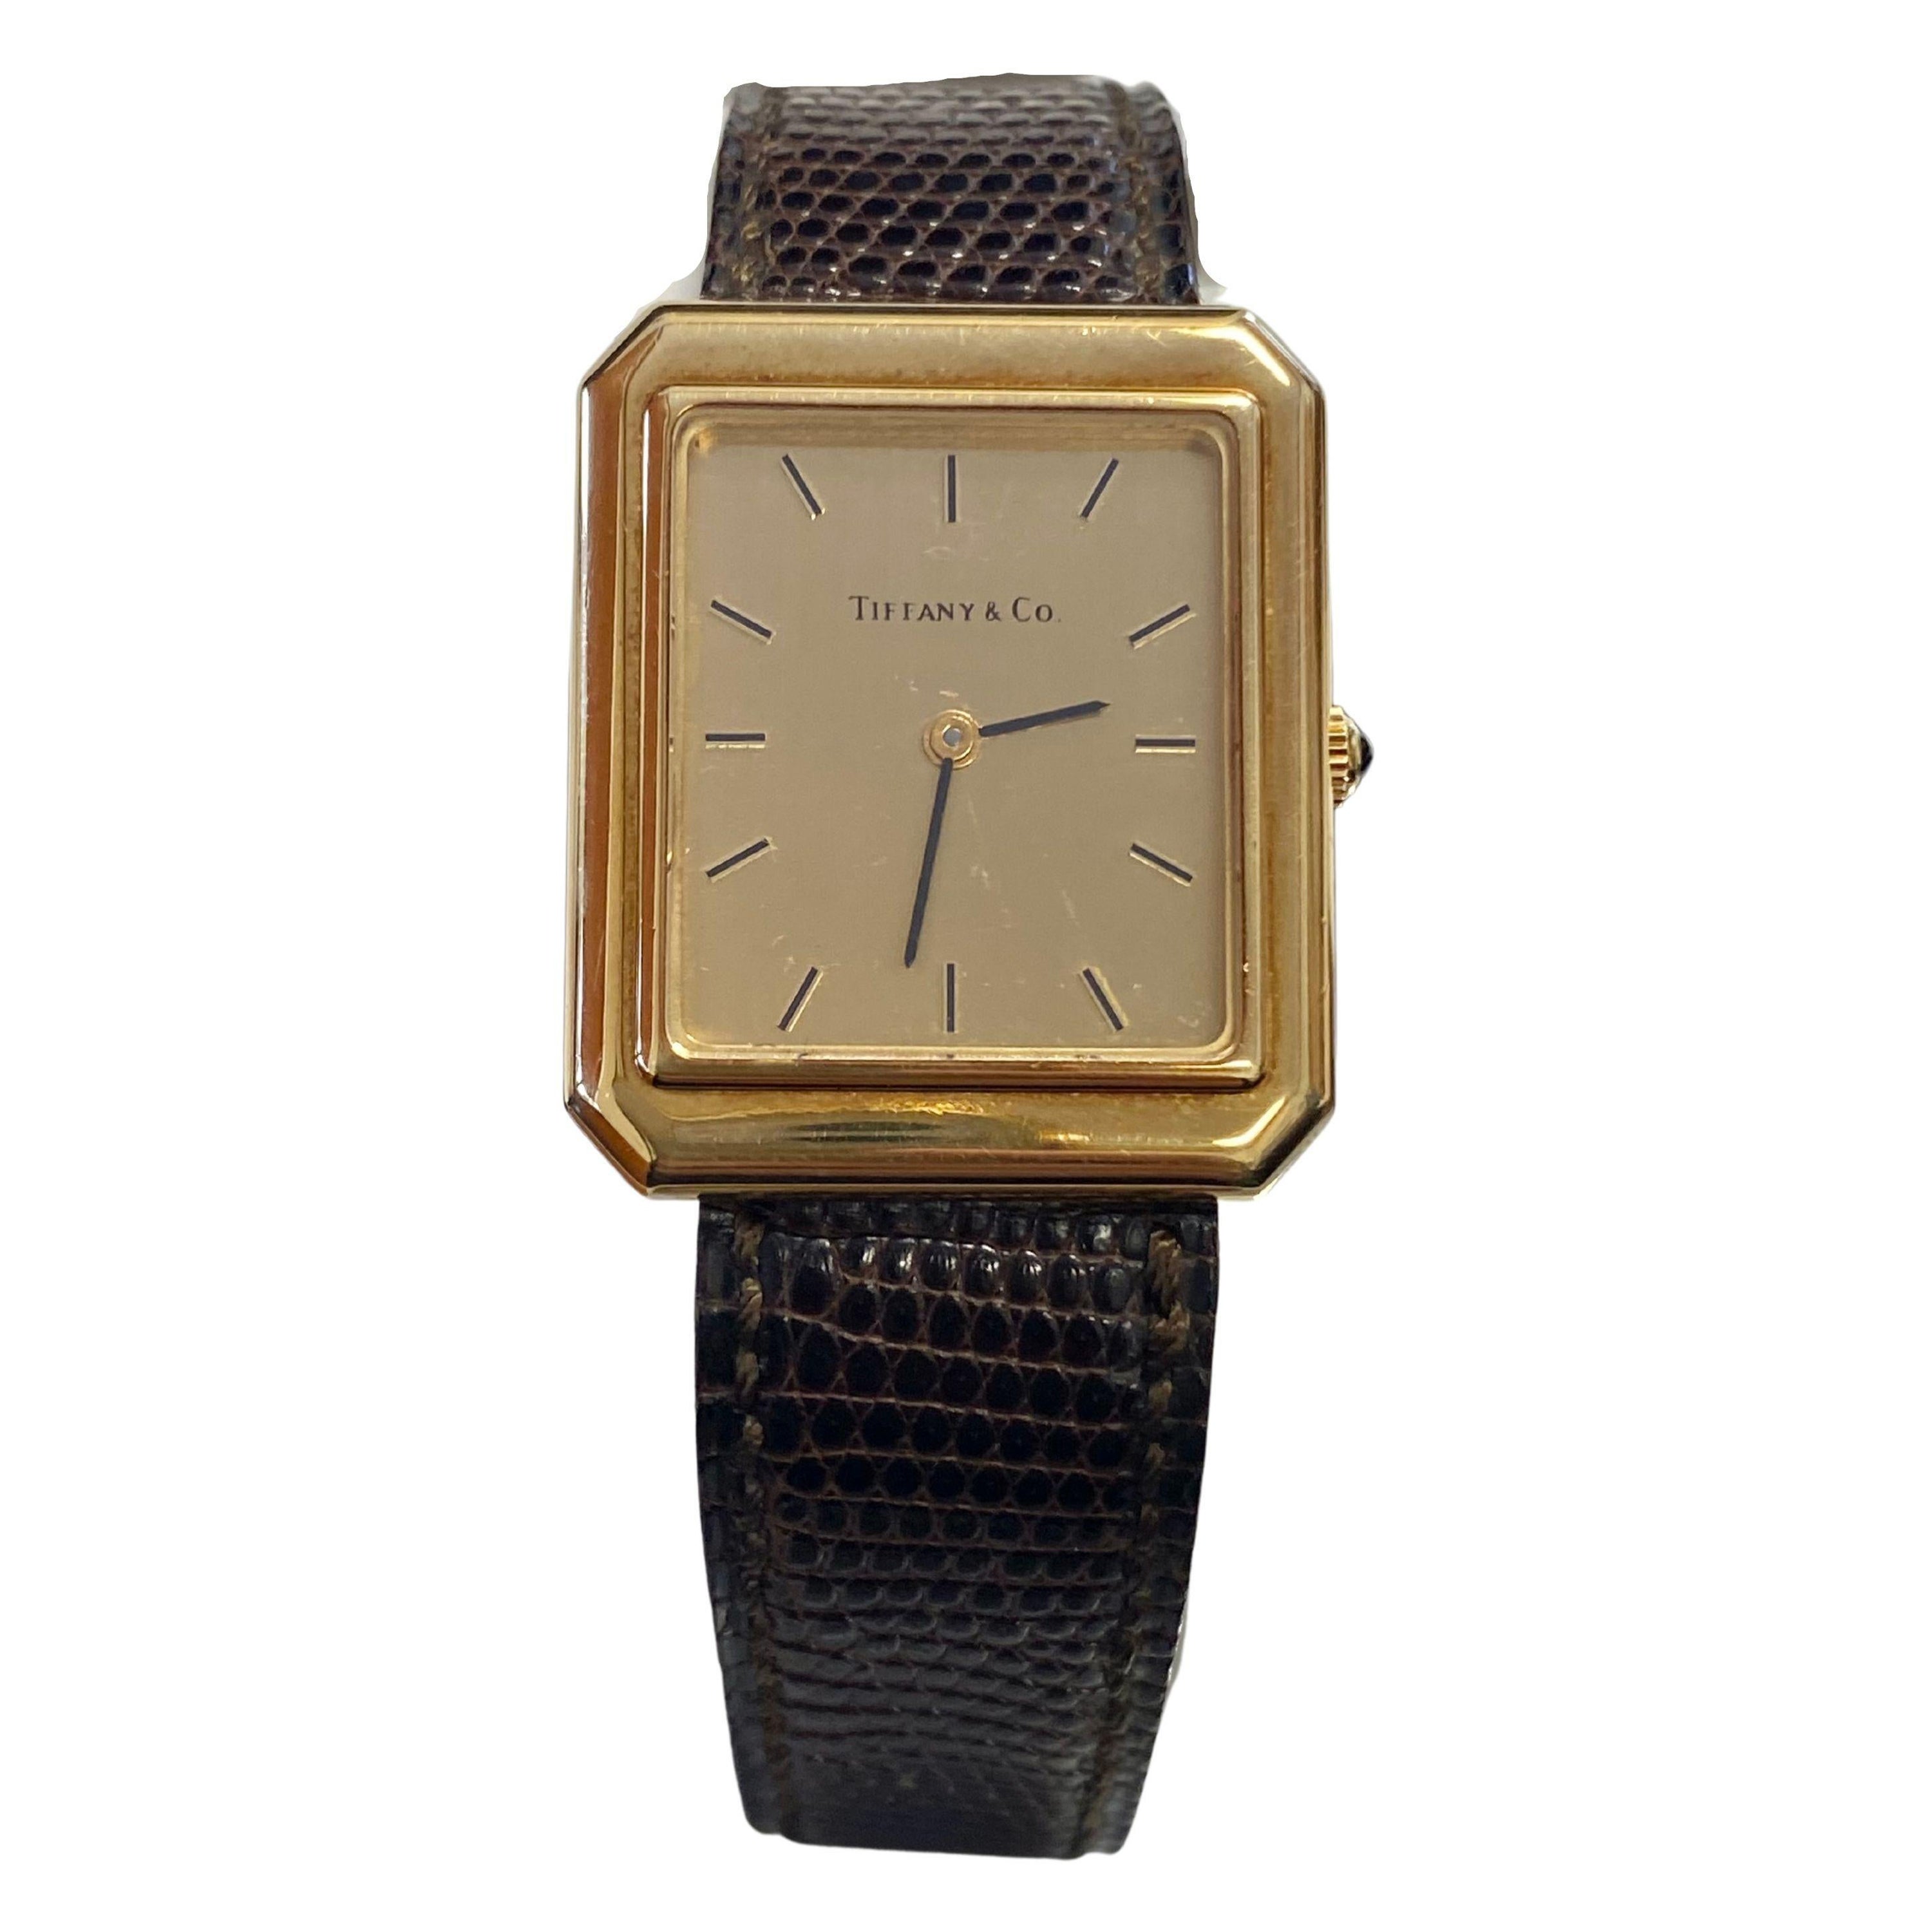 Unisex Tiffany & Co. Rectangular 18k Gold Watch with Original Leather Strap